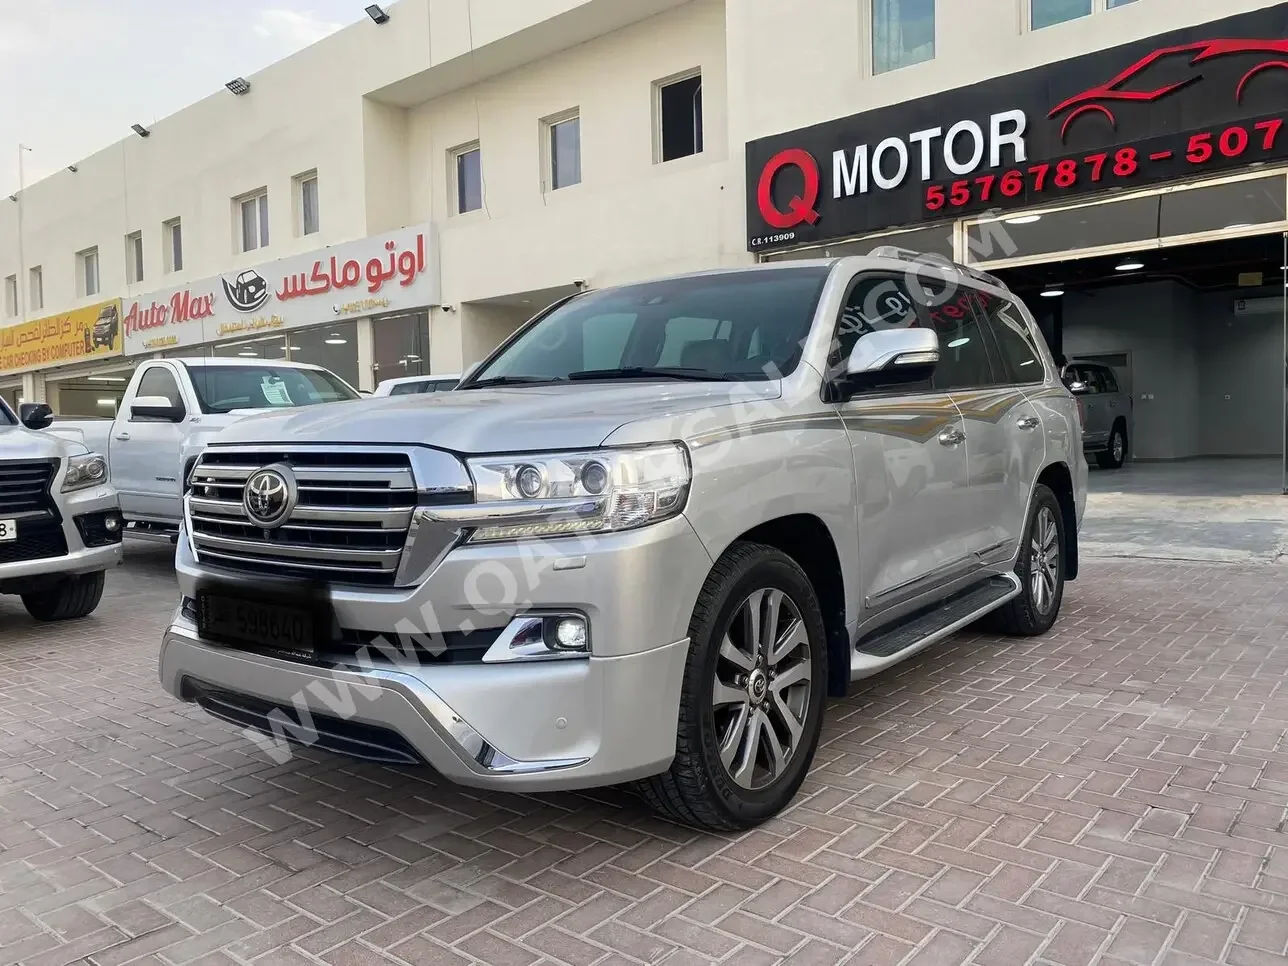 Toyota  Land Cruiser  VXS  2016  Automatic  266,000 Km  8 Cylinder  Four Wheel Drive (4WD)  SUV  Silver